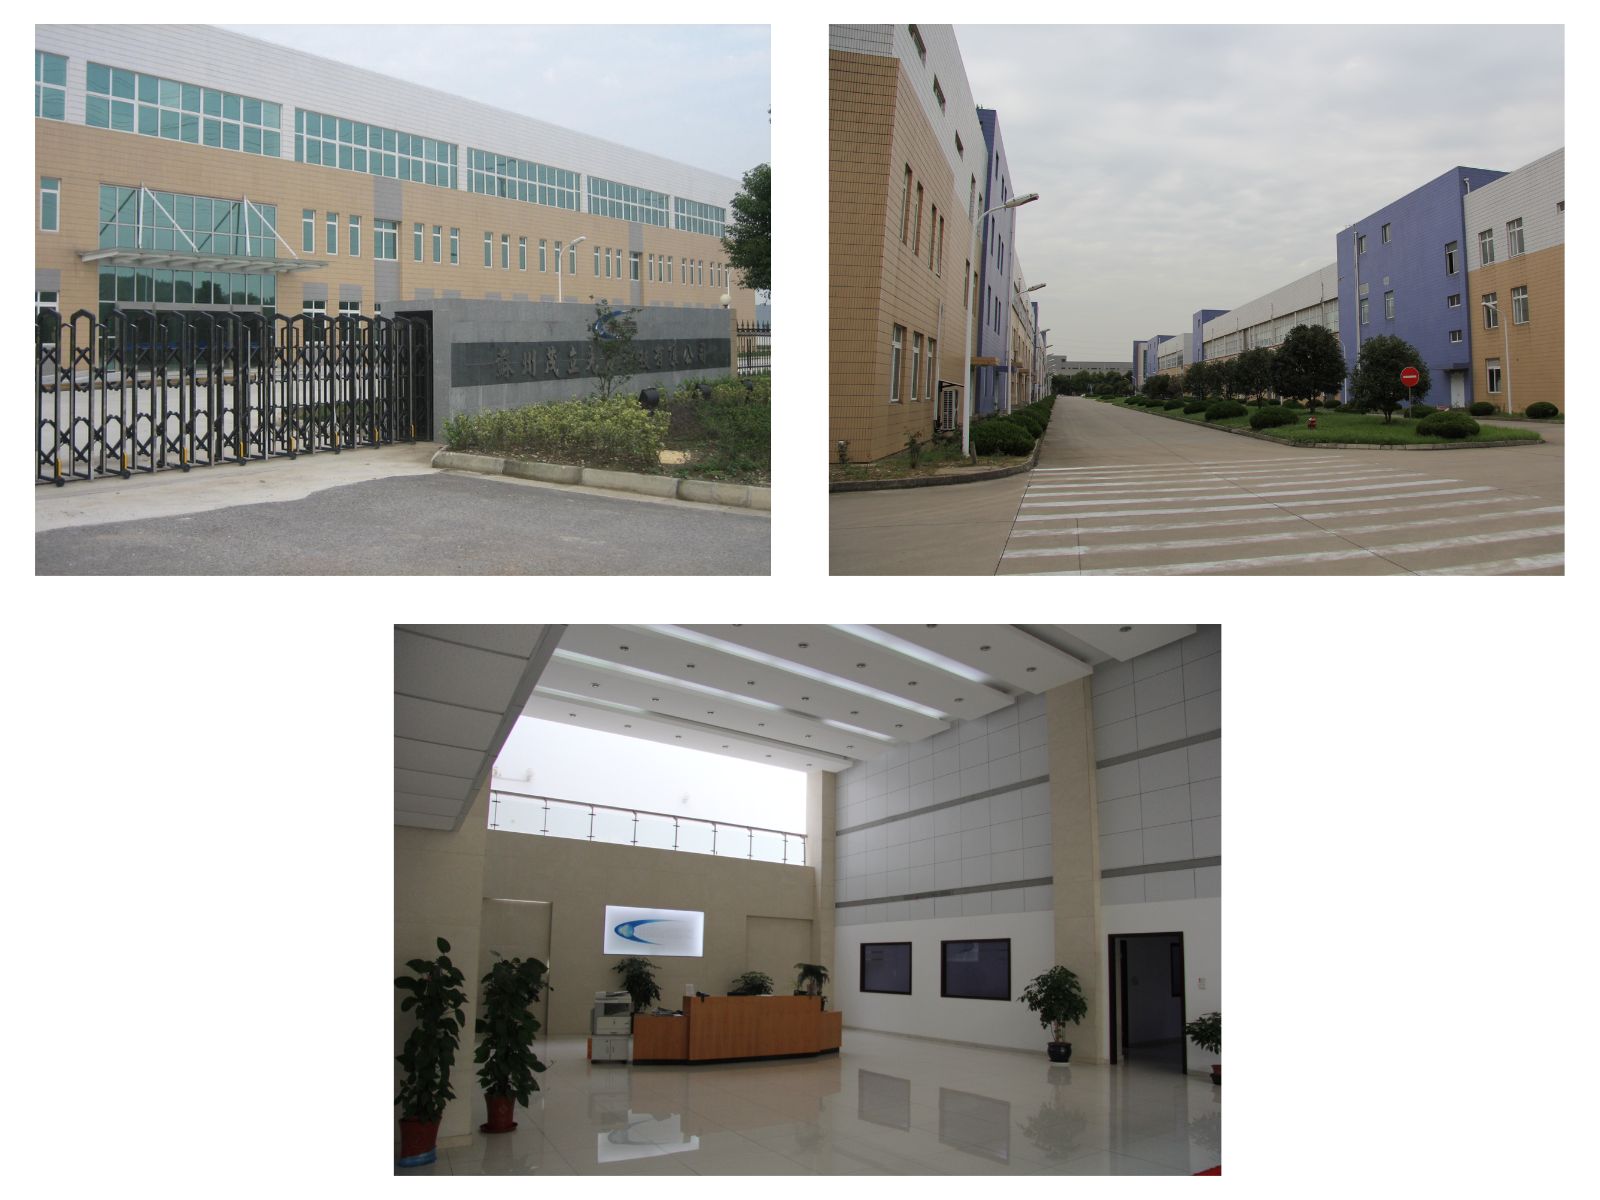 Three photos grouped together. The first is a view of the works' entrance, the second is the green space between two parts of the building outside, and the third is the white-tiled reception area with the GLT logo and lots of light, all are set in Suzhou, China.